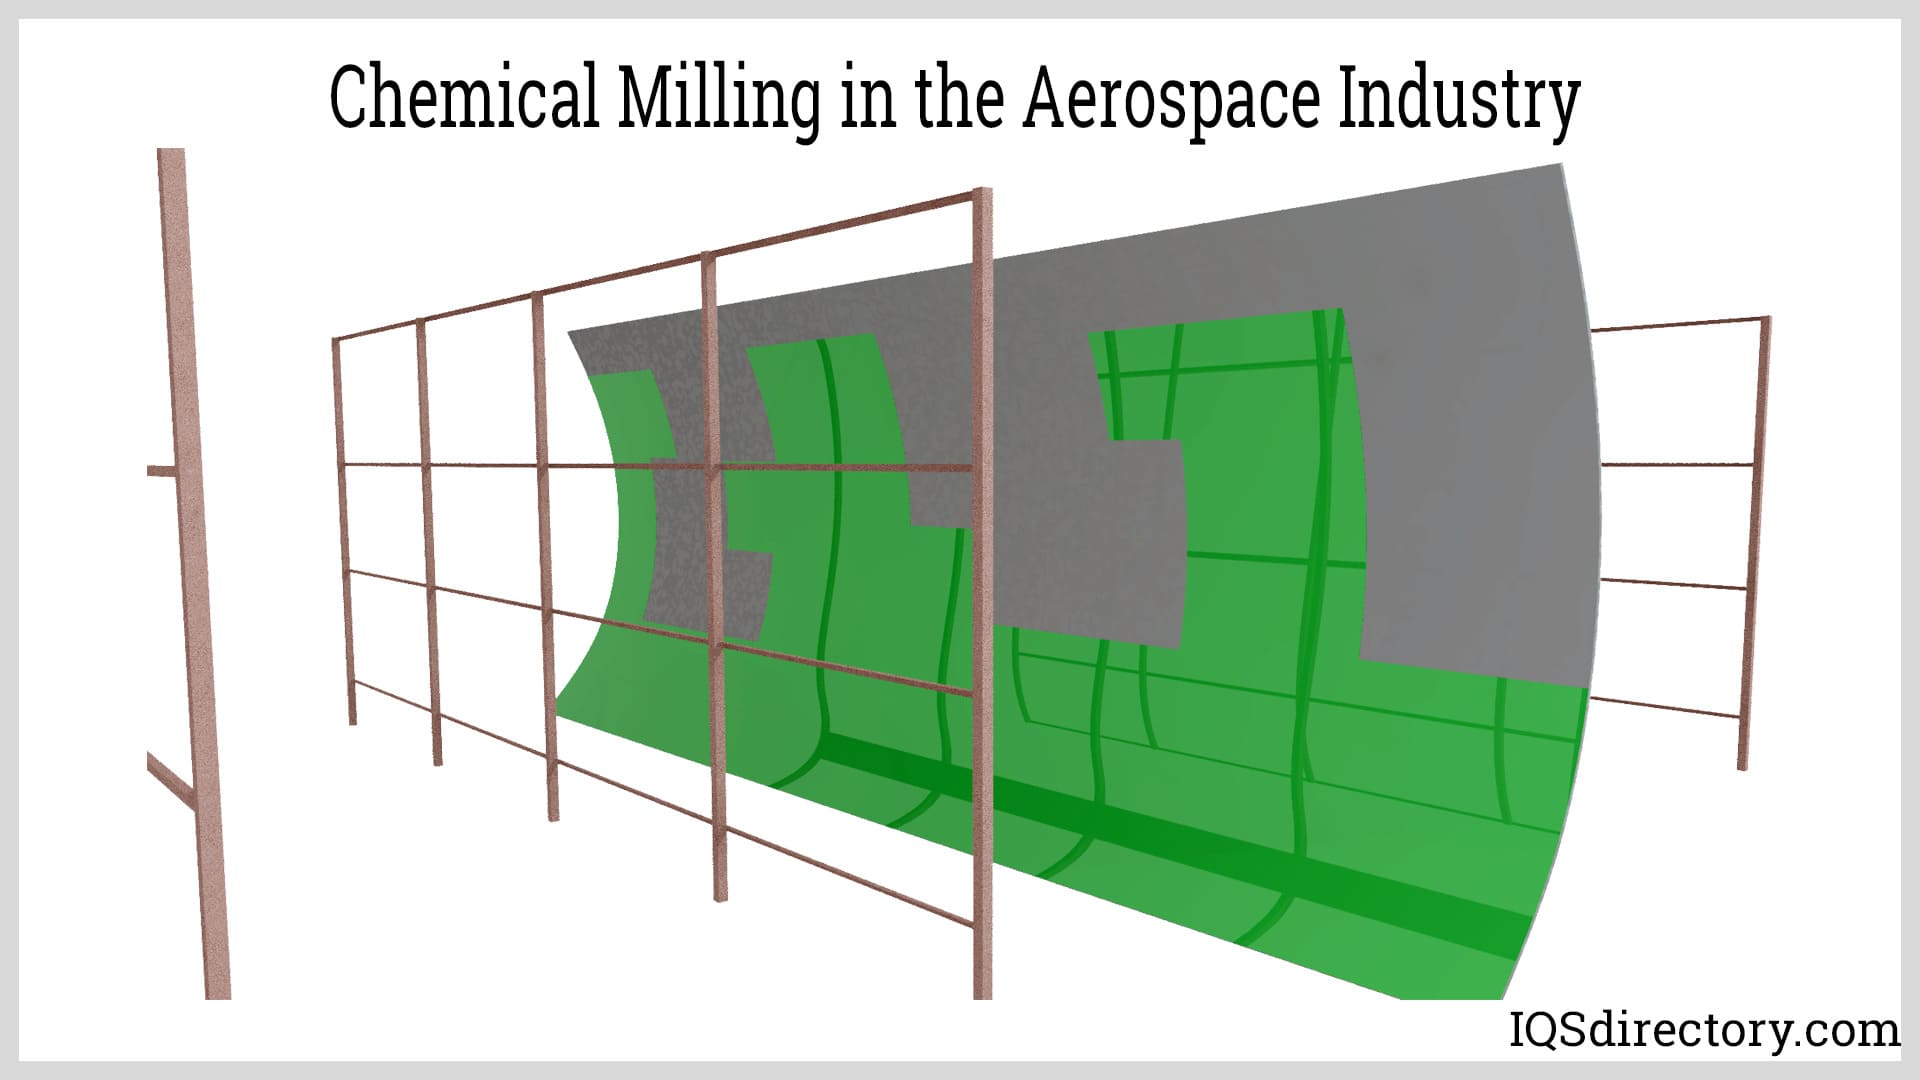 Chemical Milling in the Aerospace Industry